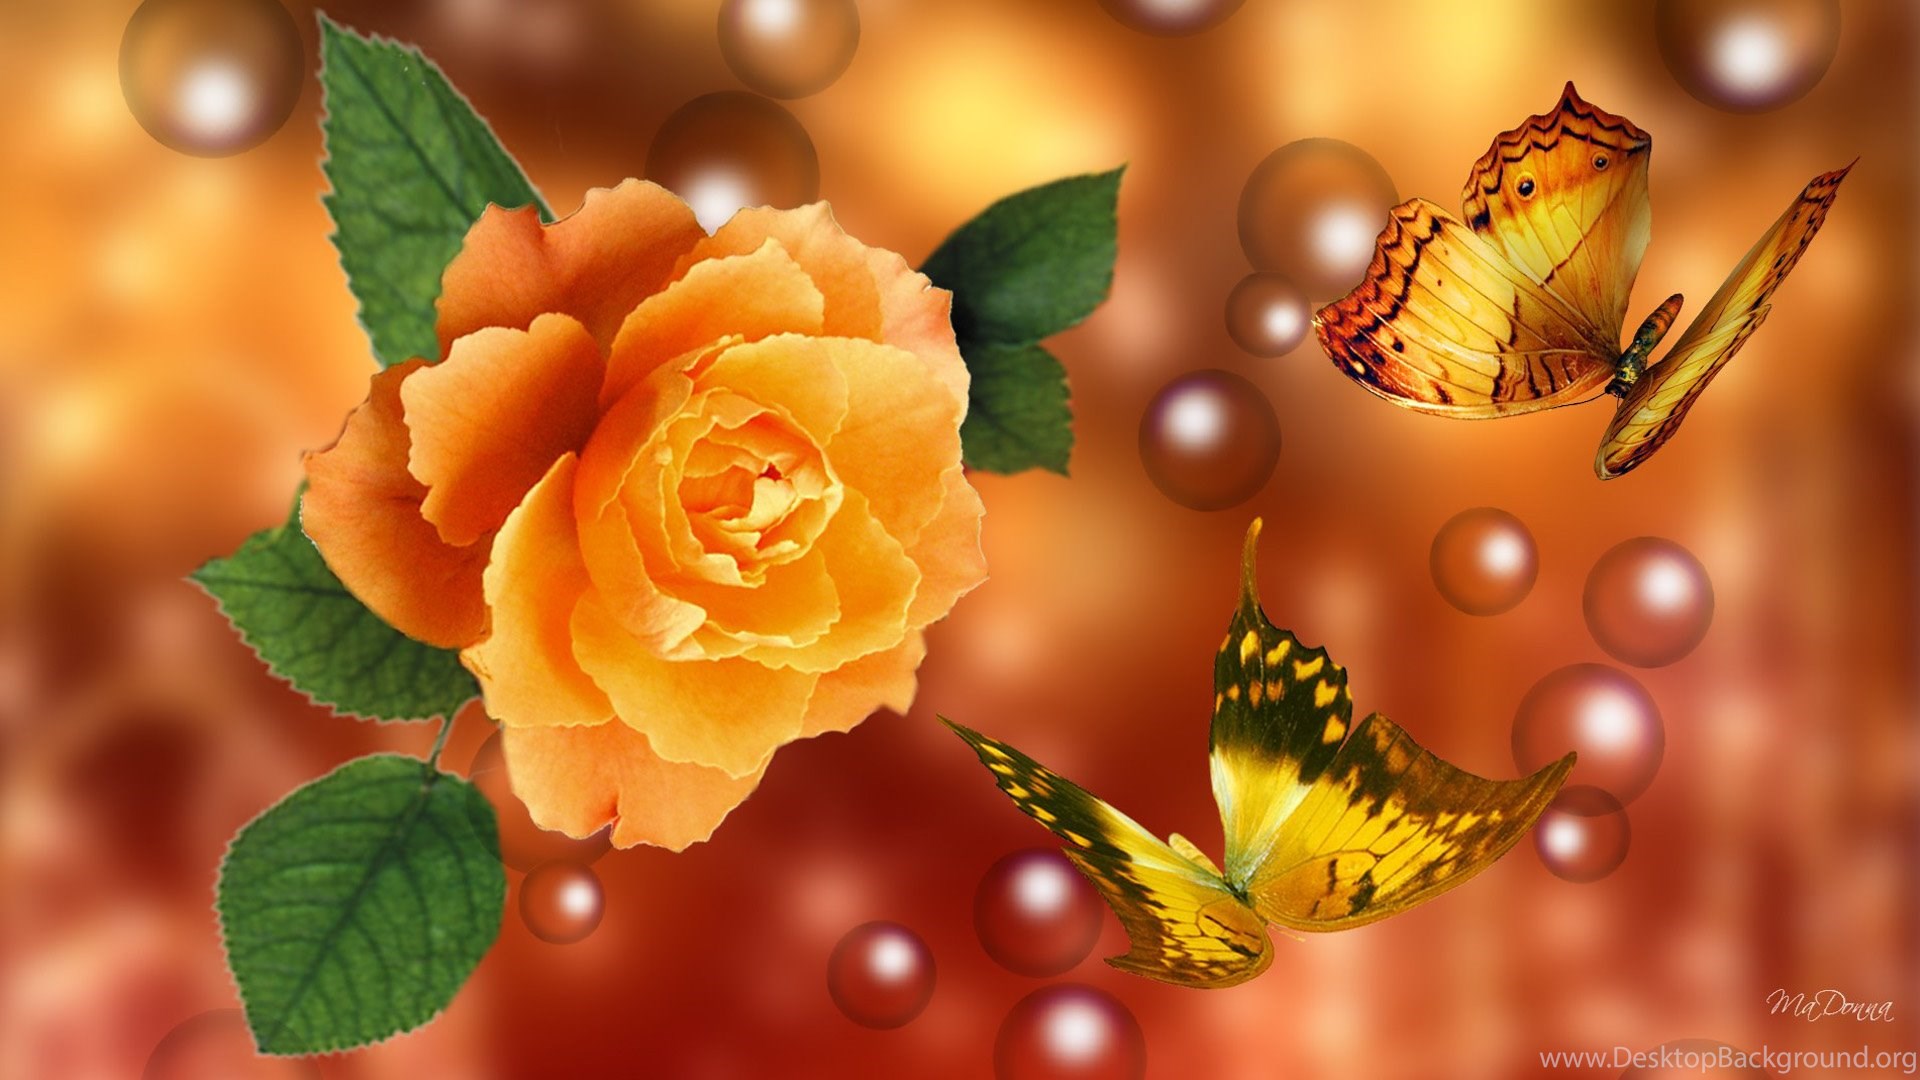 Yellow Roses And Butterflies Wallpaper Rose Flower Image